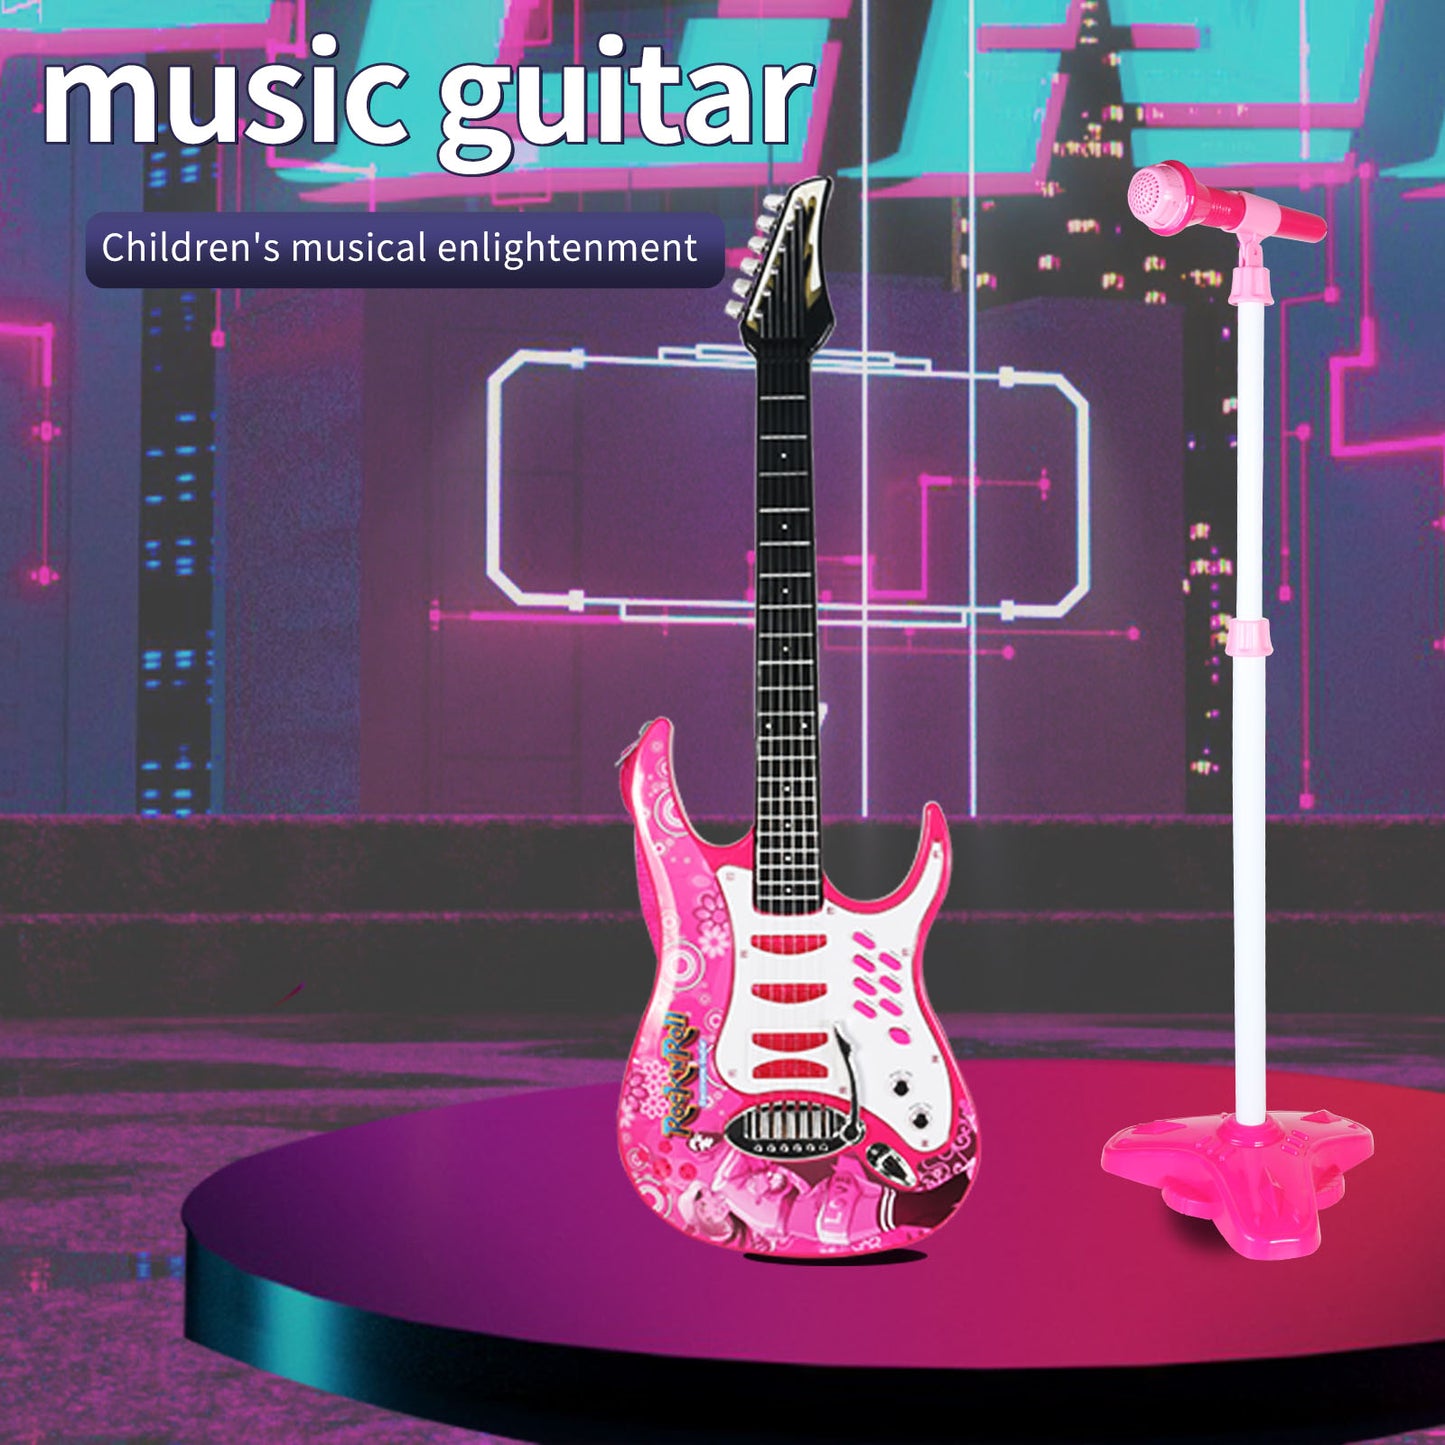 AOQIMITENJOY Musical Instrument Electronic Guitar Toys with Vertical Microphone LED Lighting Karaoke Birthday Gifts for Boys and Girls 3 Year Old+ HK-8010C